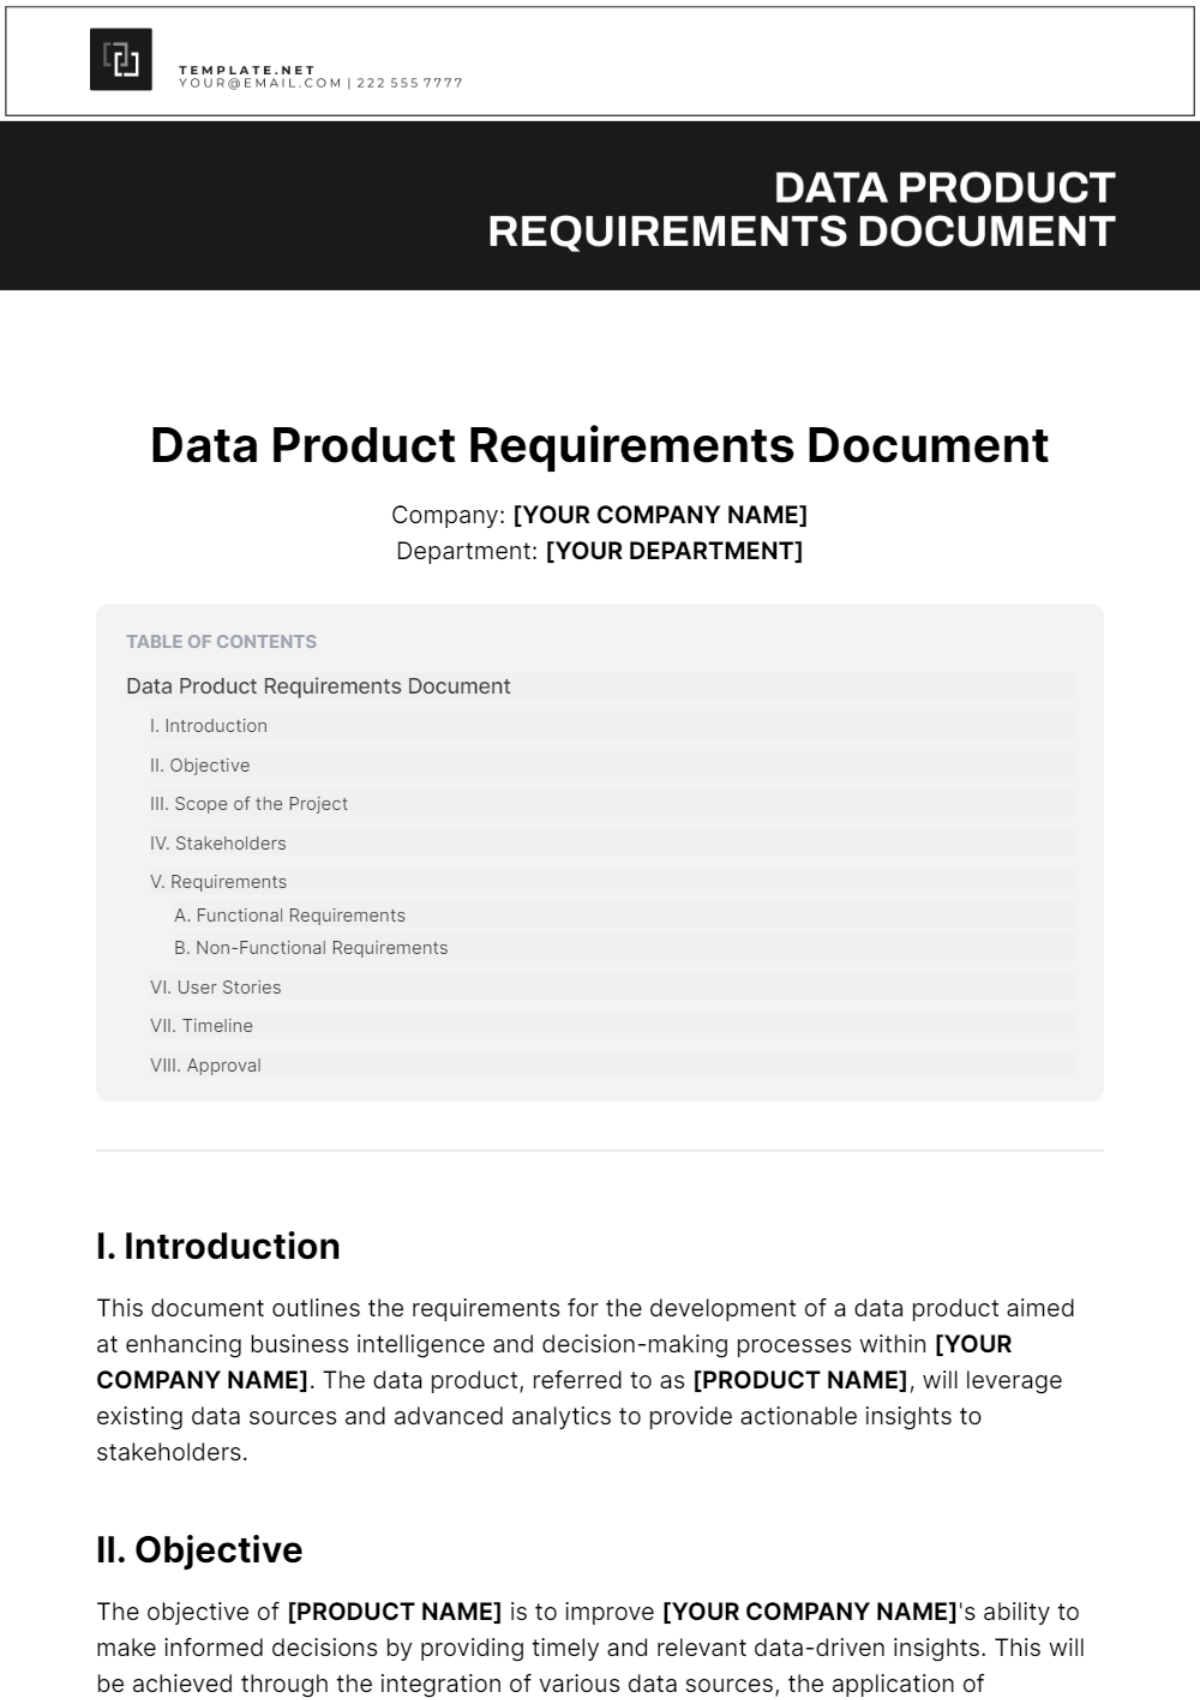 Data Product Requirements Document Template